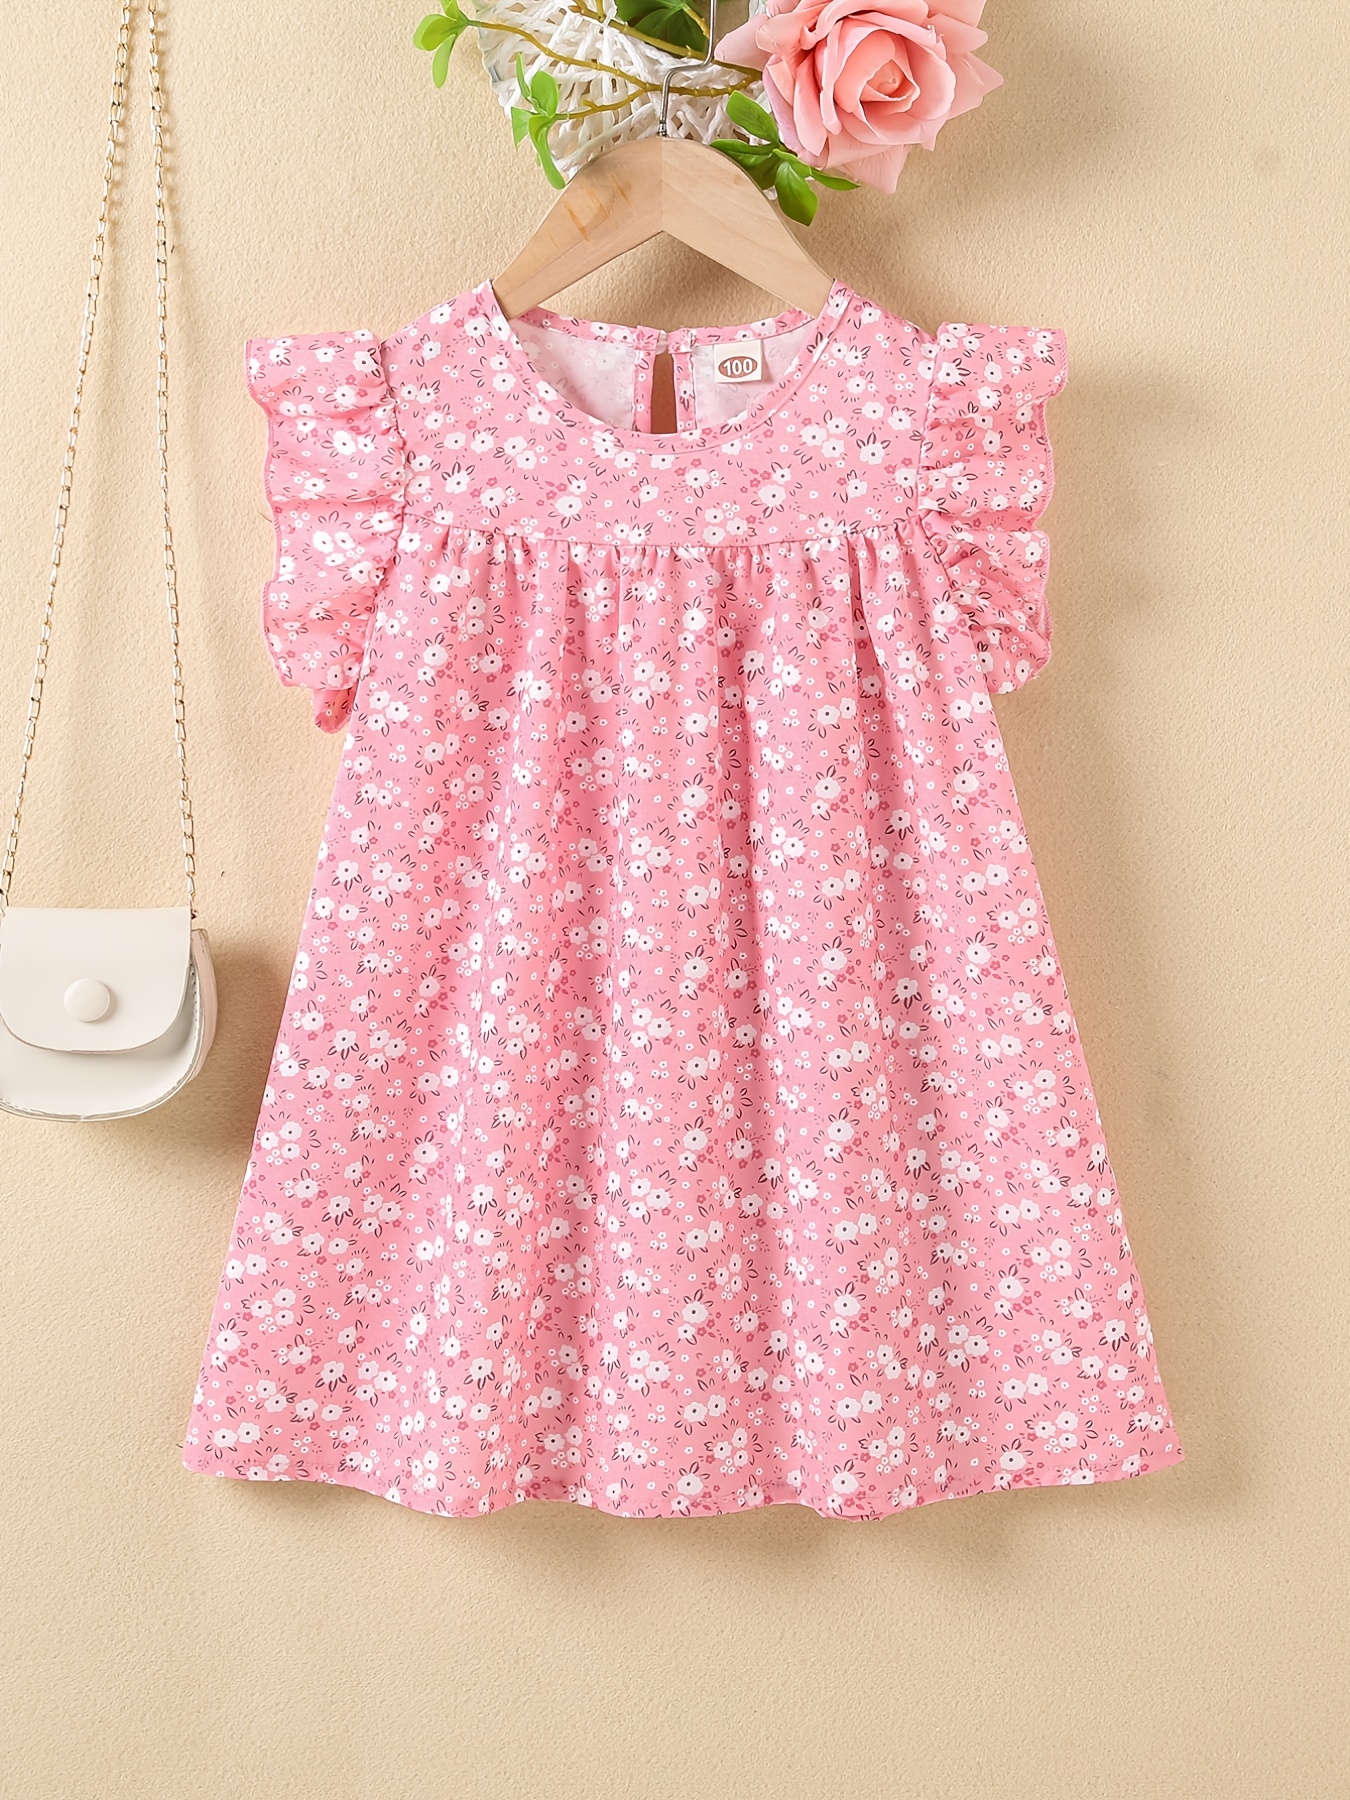 Buy Girls Floral Dress Kids Summer Clothes with Free Shipping